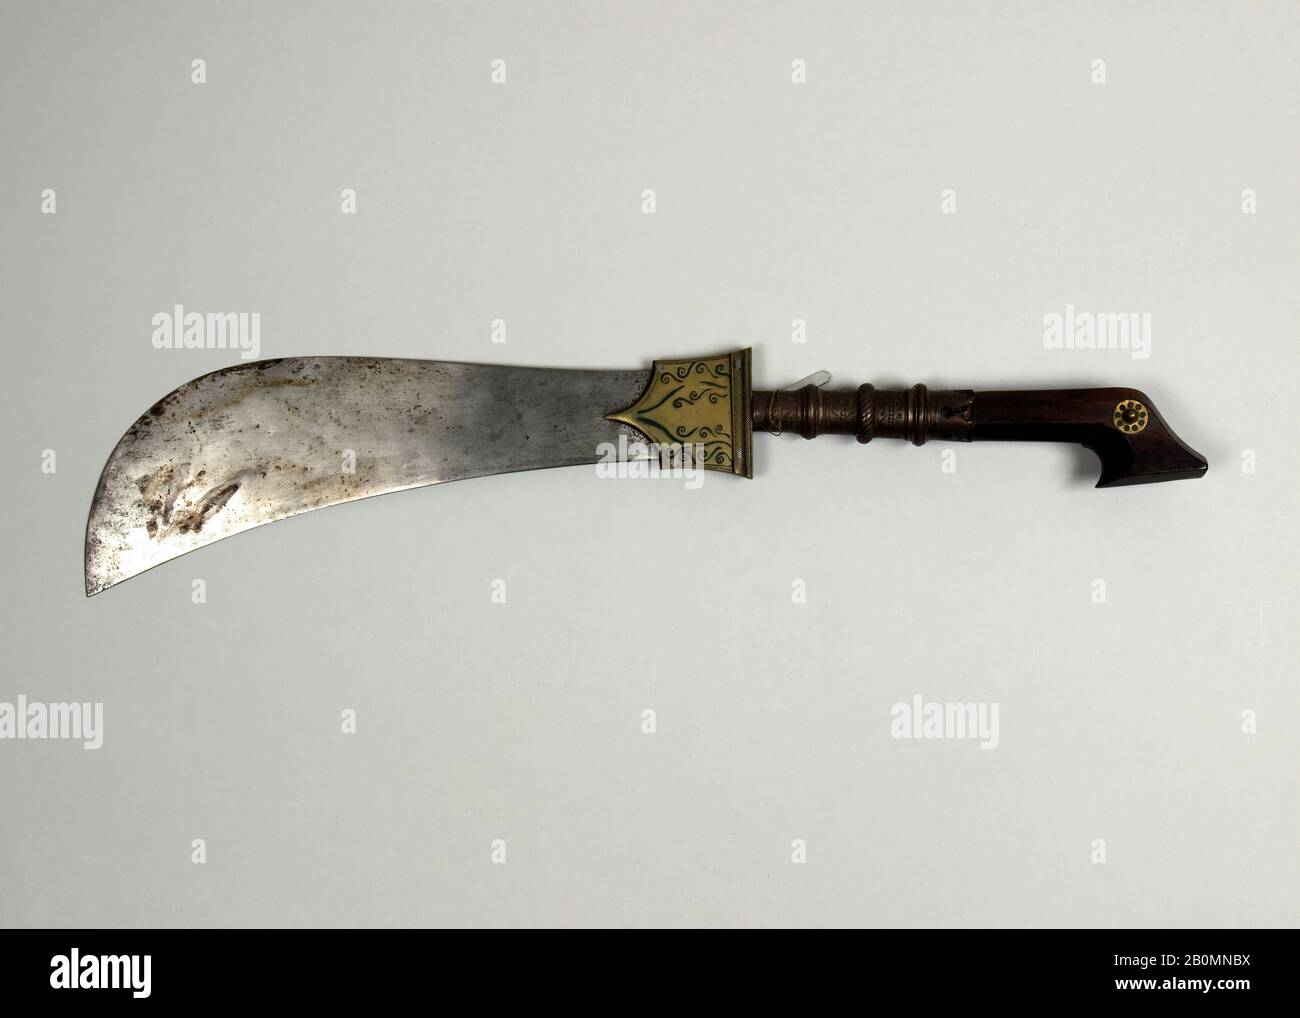 Moplah Knife, Indian, Coorg, 18th–19th century, Indian, Coorg, Steel, brass, rosewood, H. 22 1/2 in. (57.2 cm); W. 2 3/4 in. (7 cm); Wt. 1 lb. 5.8 oz. (618 g), Knives Stock Photo